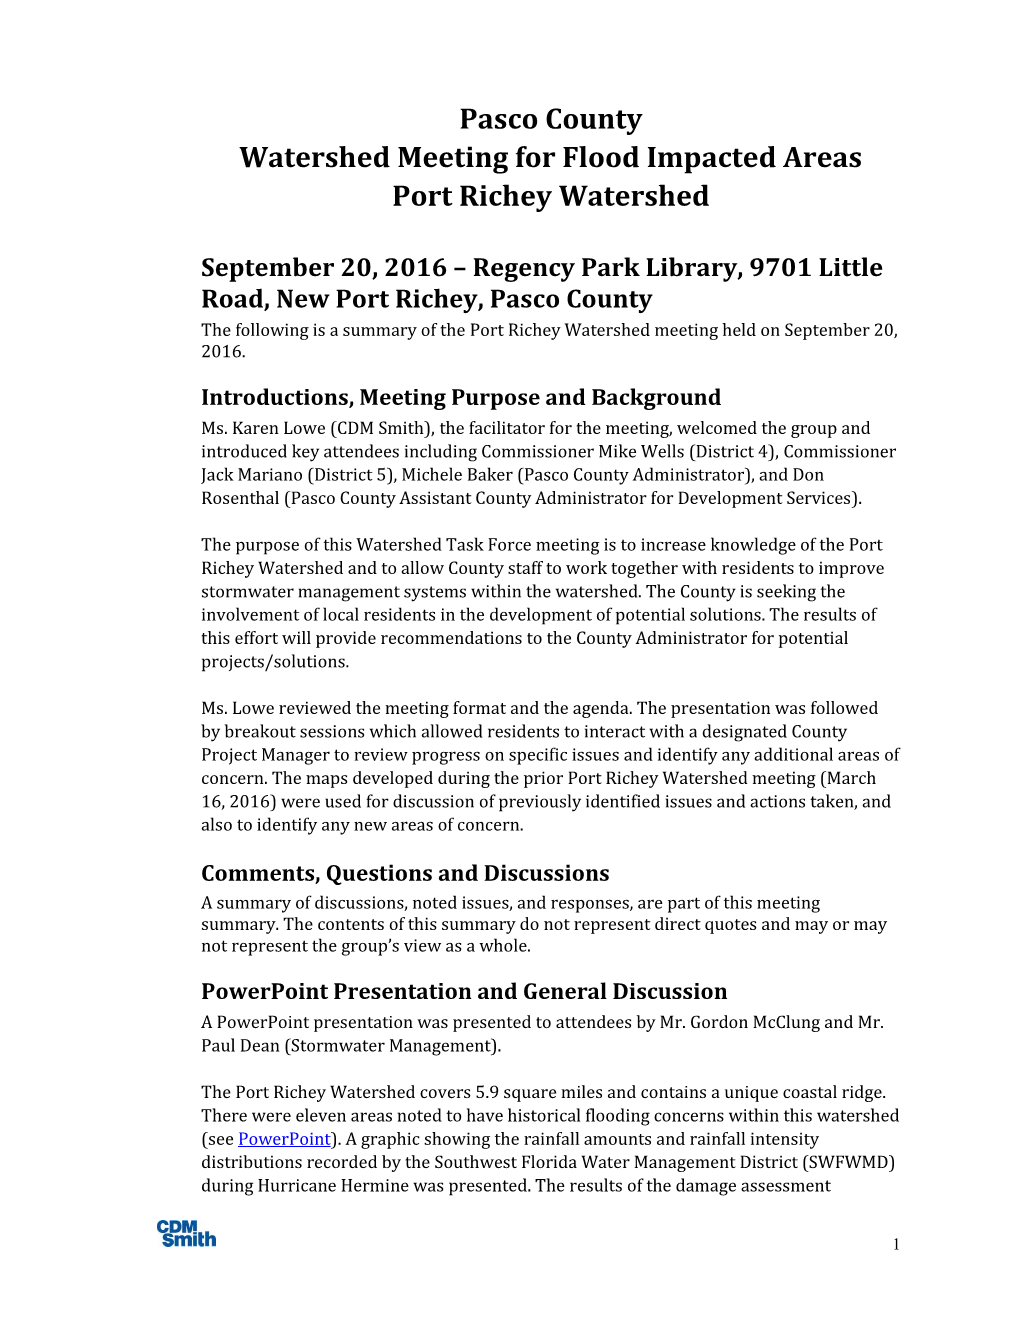 Pasco County Watershed Meeting for Flood Impacted Areas Port Richey Watershed